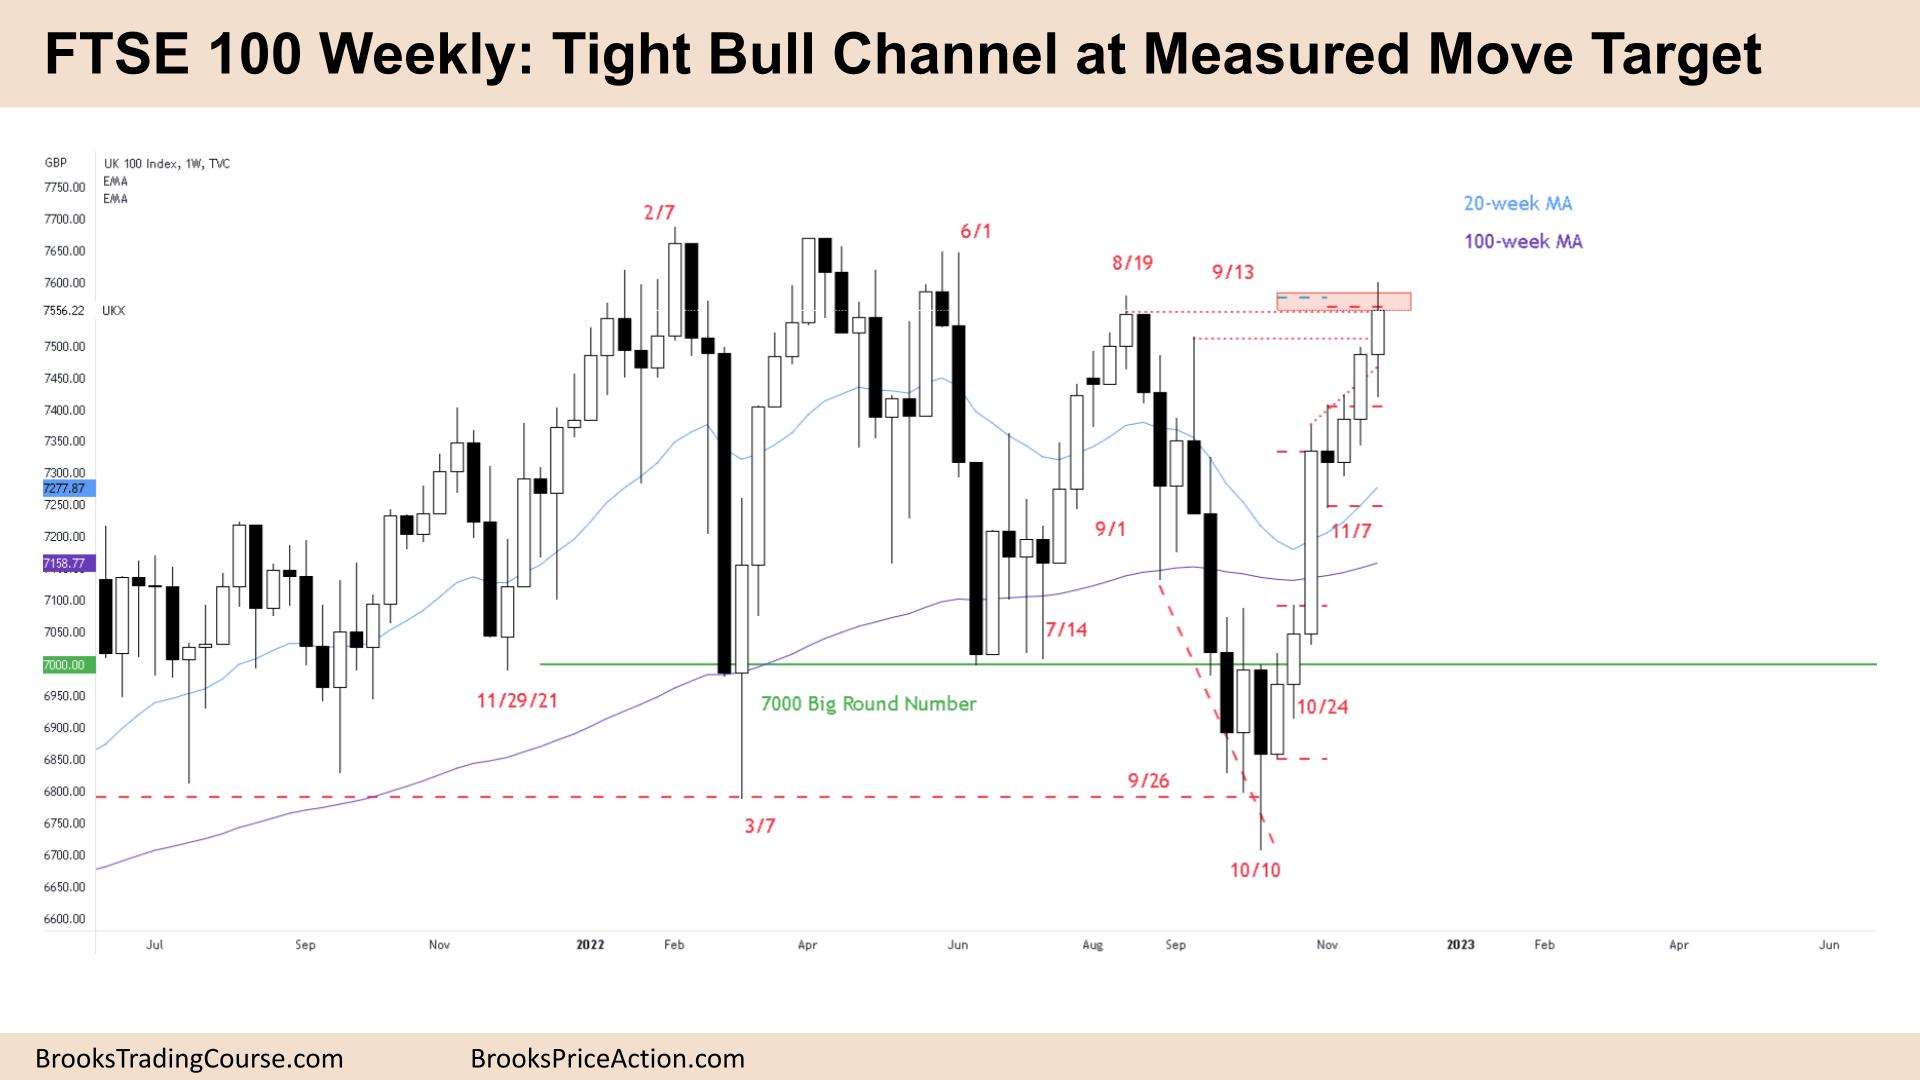 FTSE 100 Tight Bull Channel at Measured Move Target